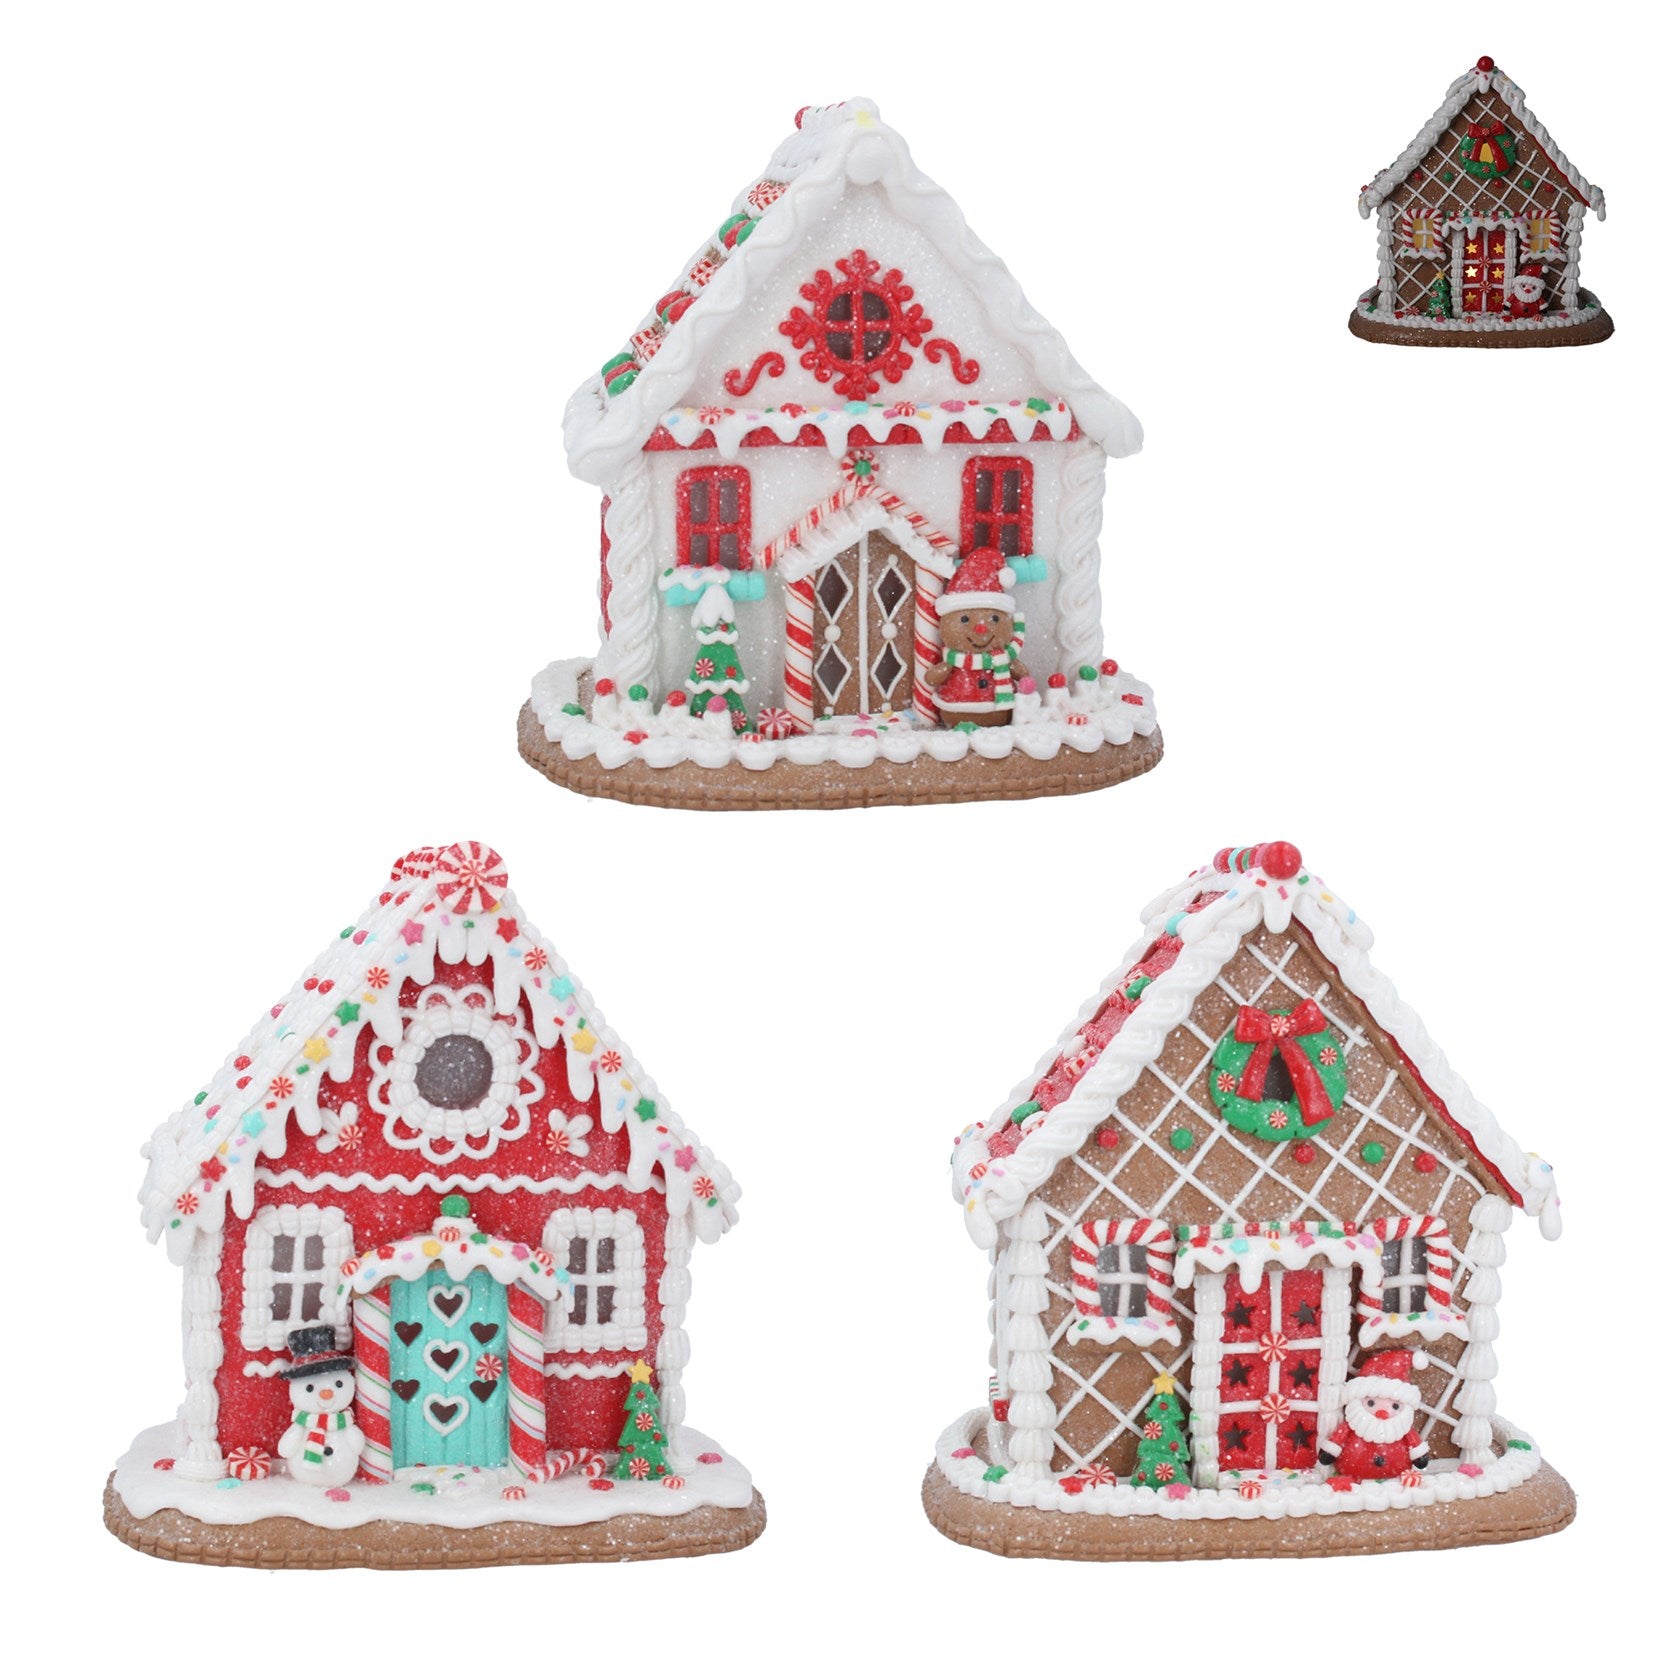 Light Up Gingerbread House - Candy Cottage